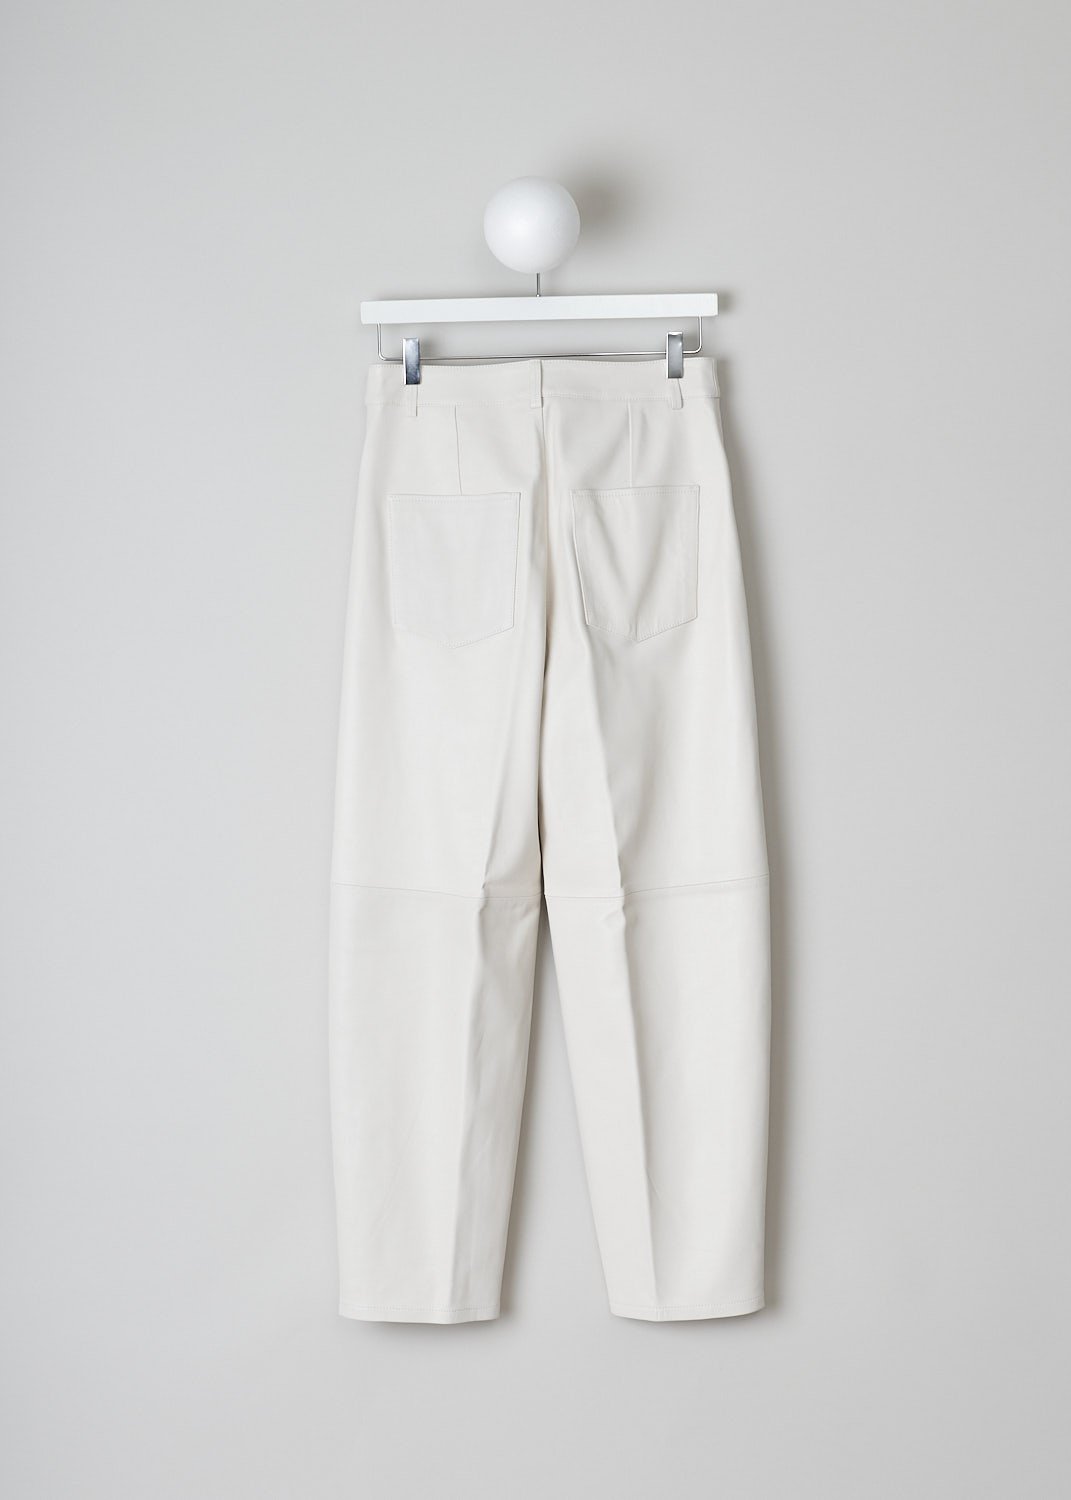 WANDLER, CHAMOMILE LILY PANTS, 22306_060301_1064_CHAMOMILE_LILY, White, Back, These white leather Chamomile Lily pants have a waistband with belt loops and a button and zip closure. The pants have a high-waisted fit. The balloon legs are cropped at the ankle. These pants have slanted pockets in the front and patch pockets in the back. 

